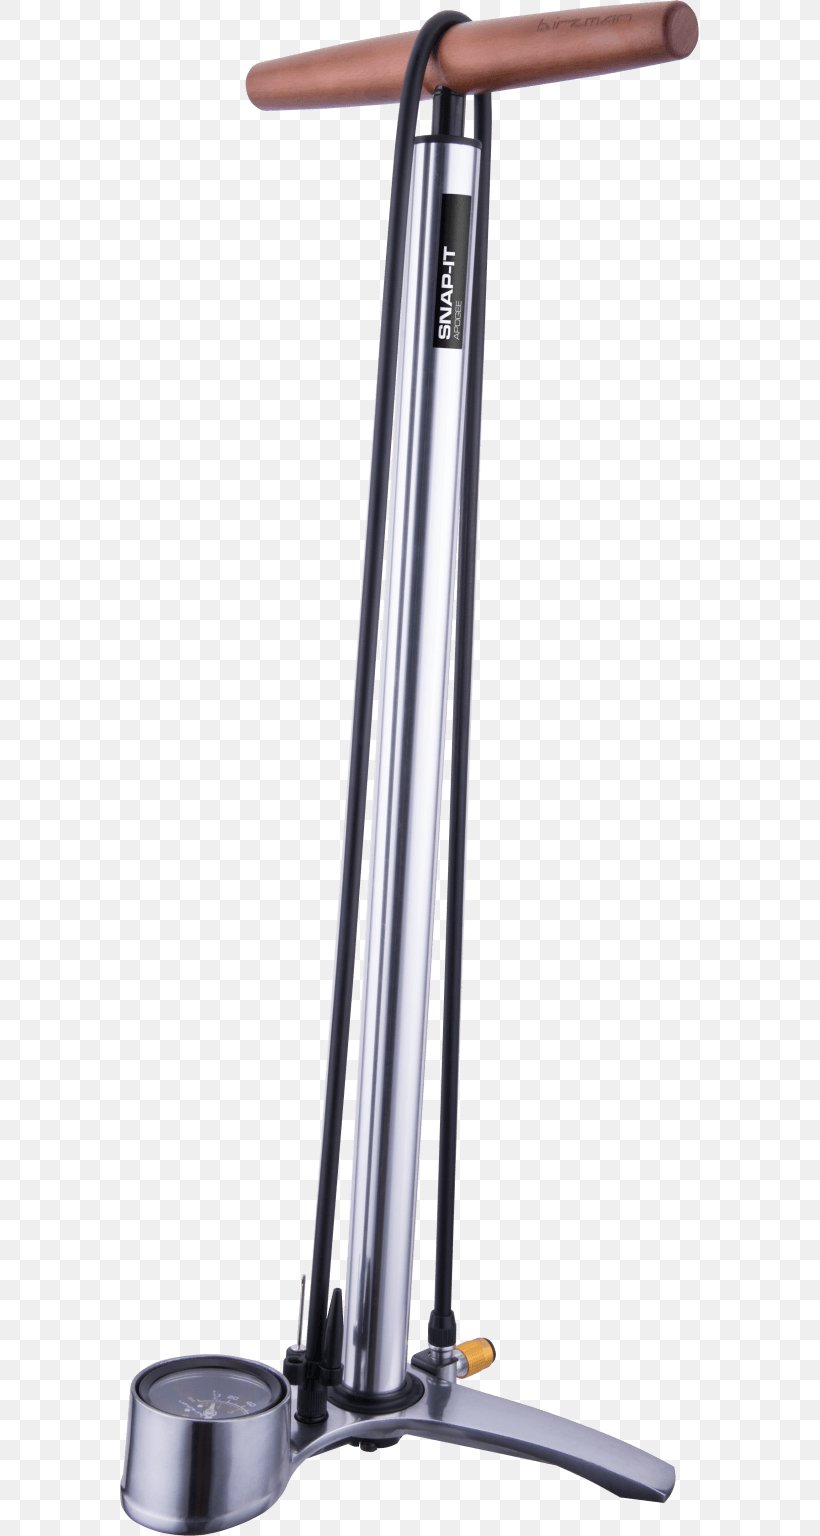 Bicycle Pumps Bicycle Pumps Valve Bicycle Frames, PNG, 579x1536px, Pump, Bicycle, Bicycle Accessory, Bicycle Frame, Bicycle Frames Download Free